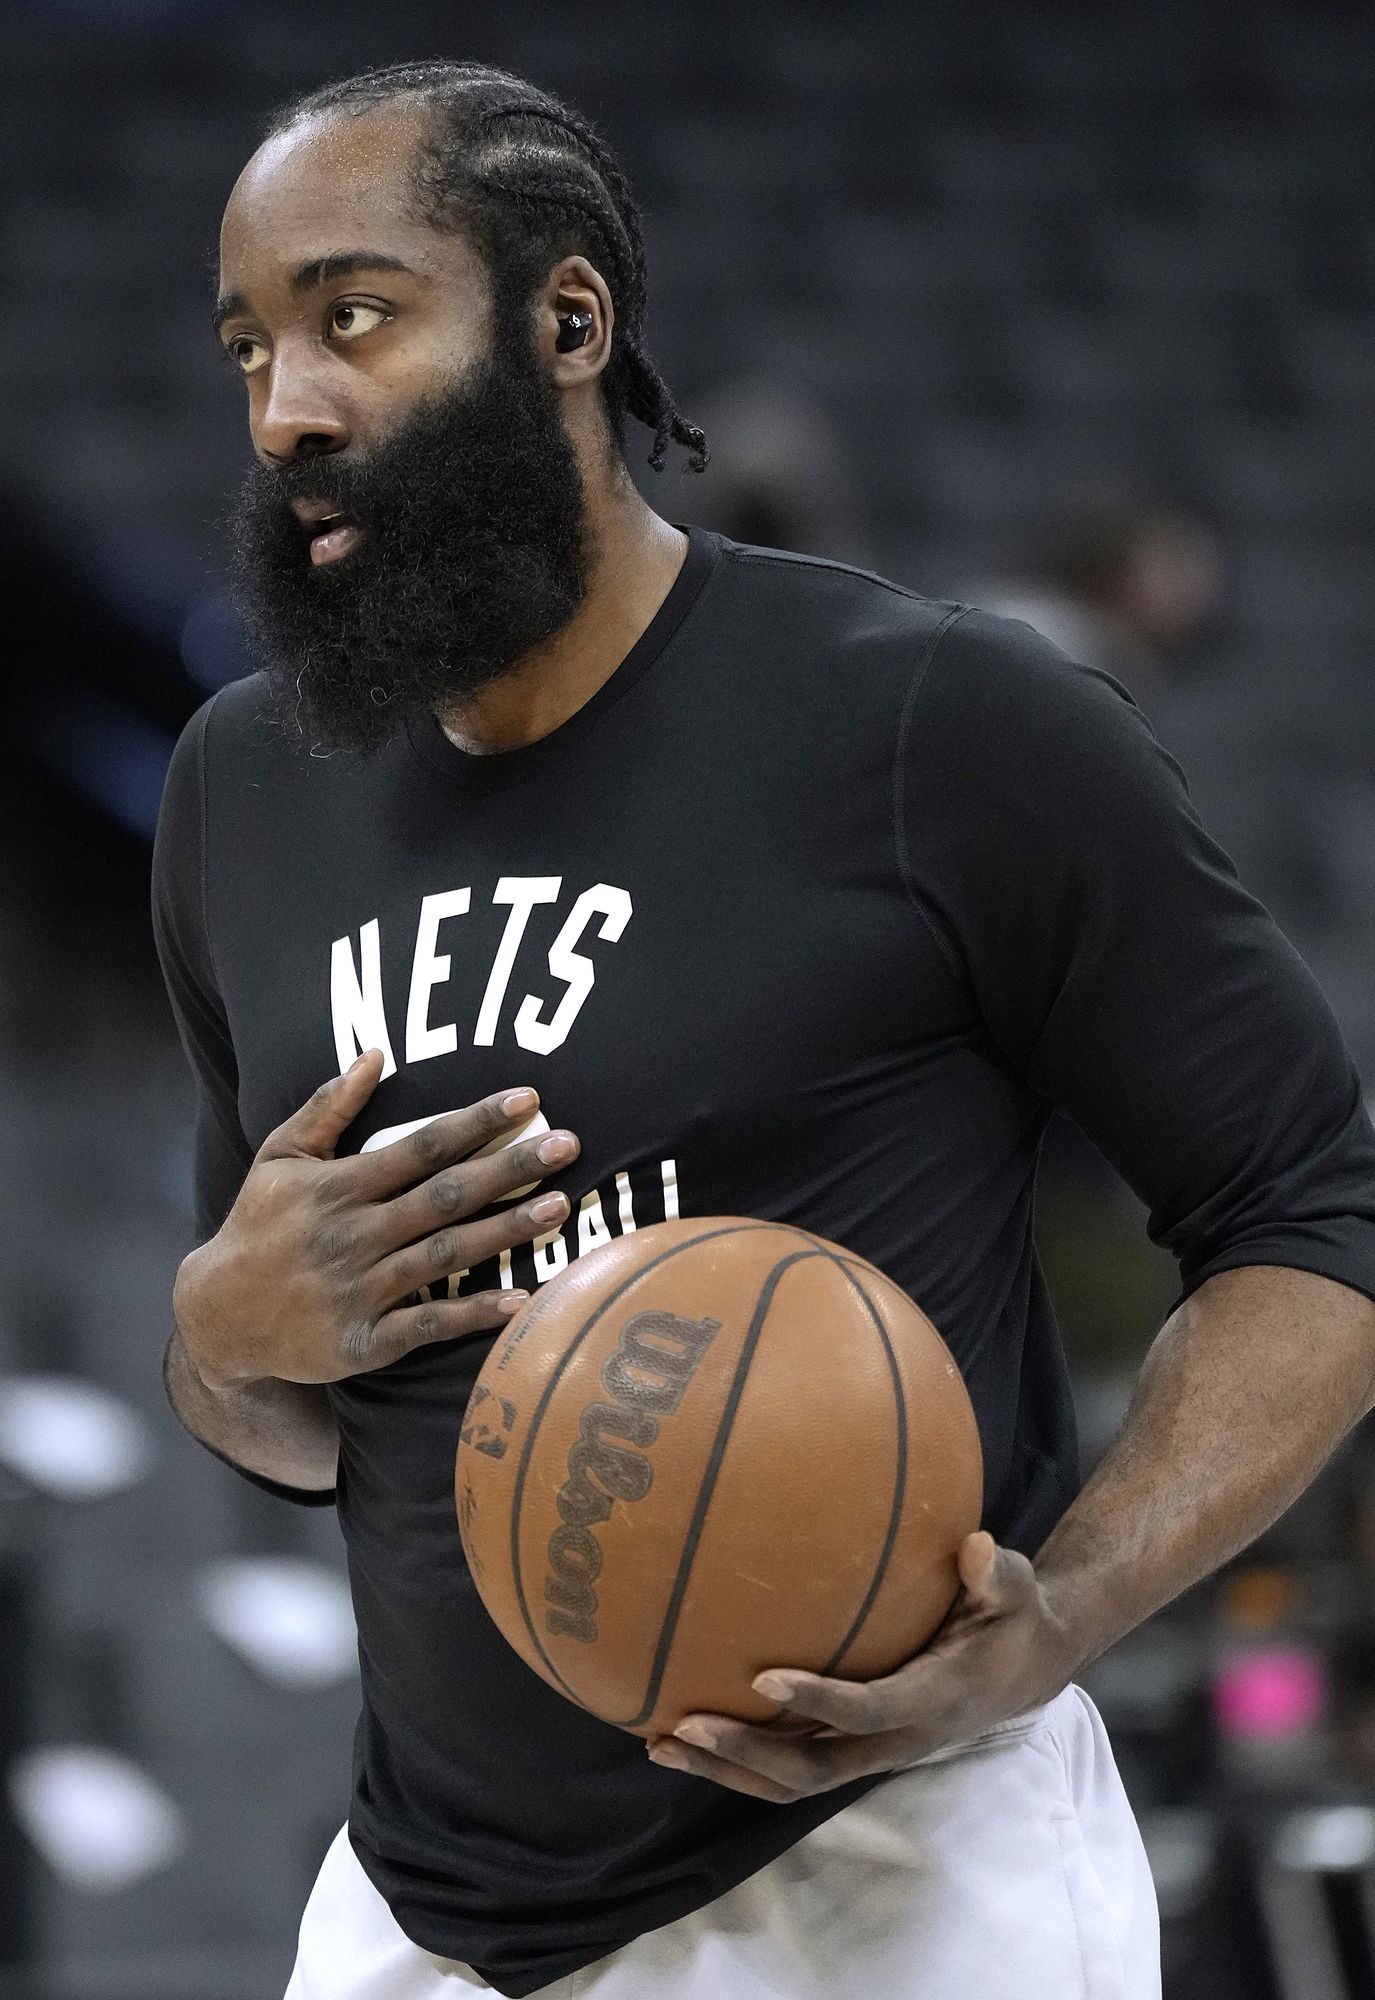 James Harden will get 'legit chance' with Nets